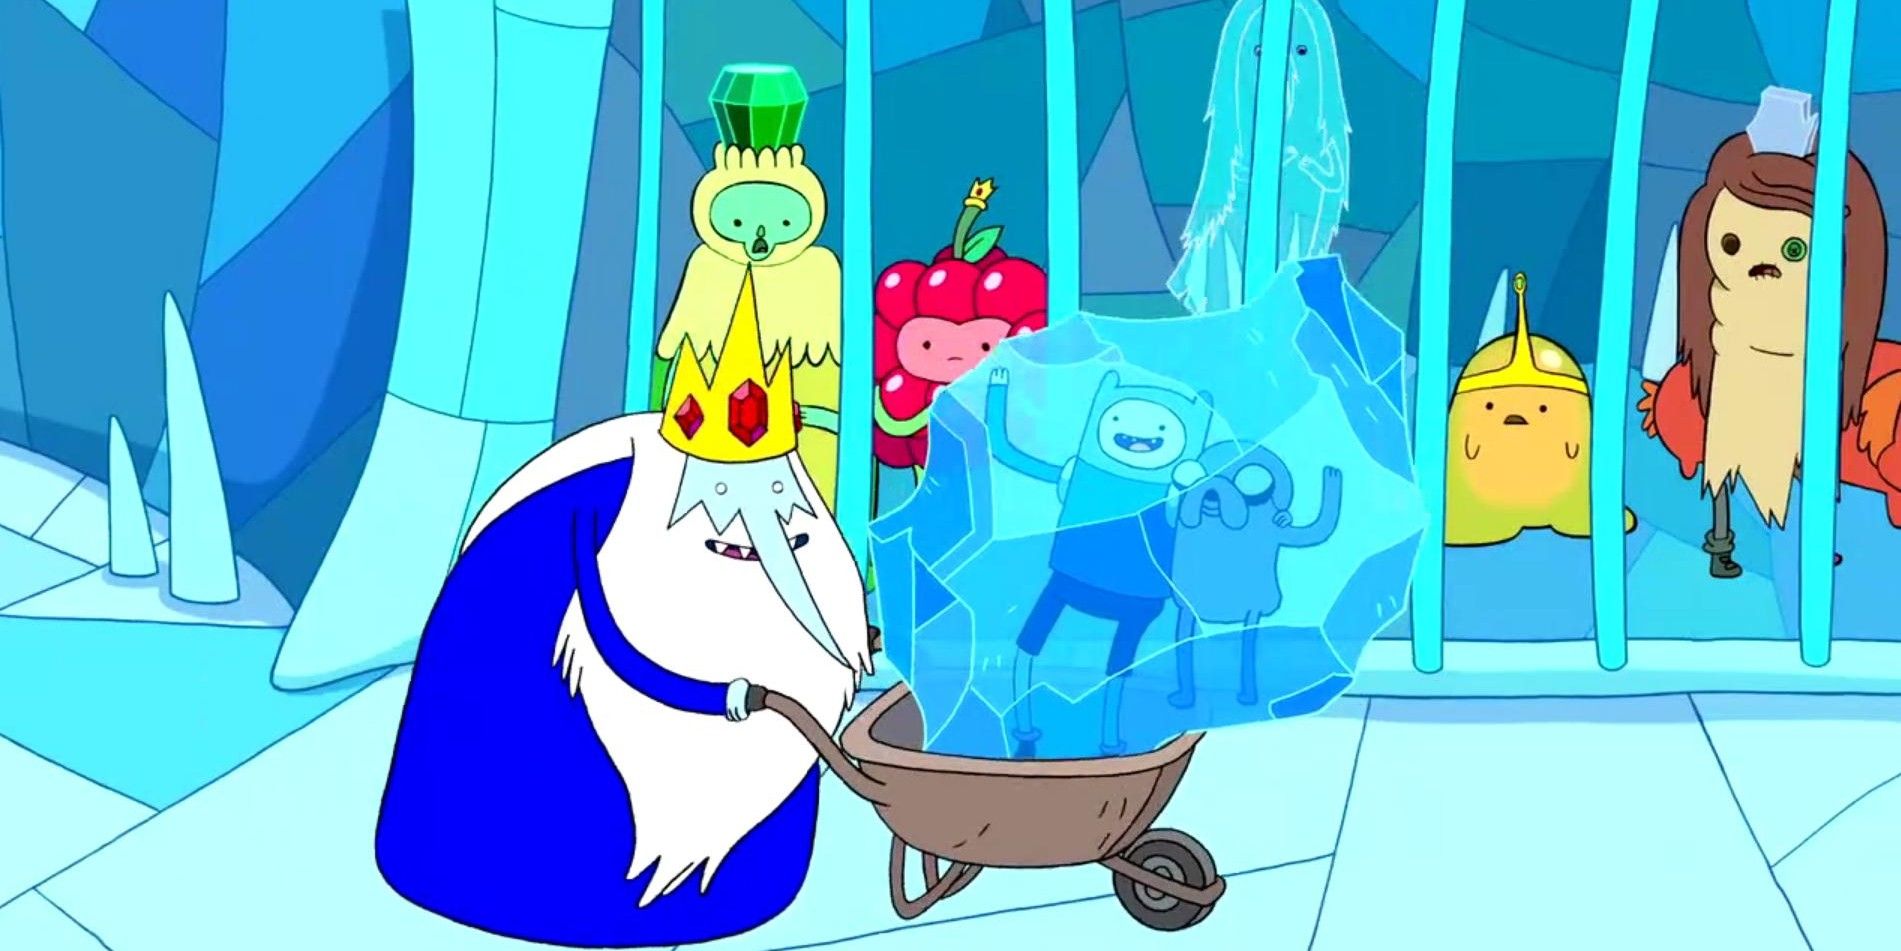 Ice King hauls froze Finn and Jake in Adventure Time